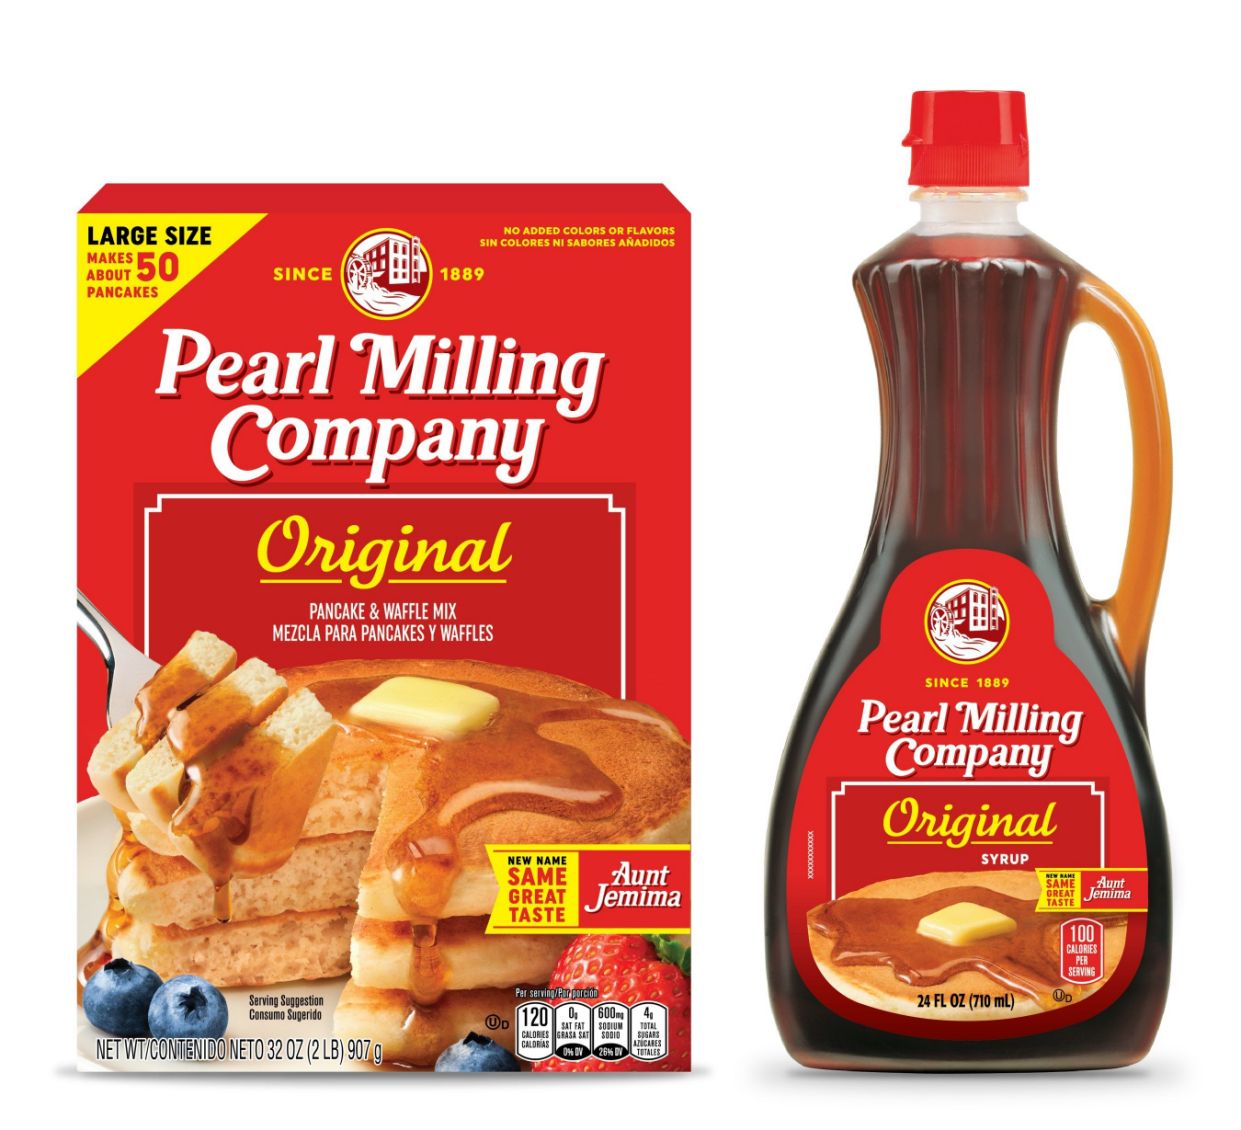 You are currently viewing PepsiCo announces rebrand of Aunt Jemima as Pearl Milling Company